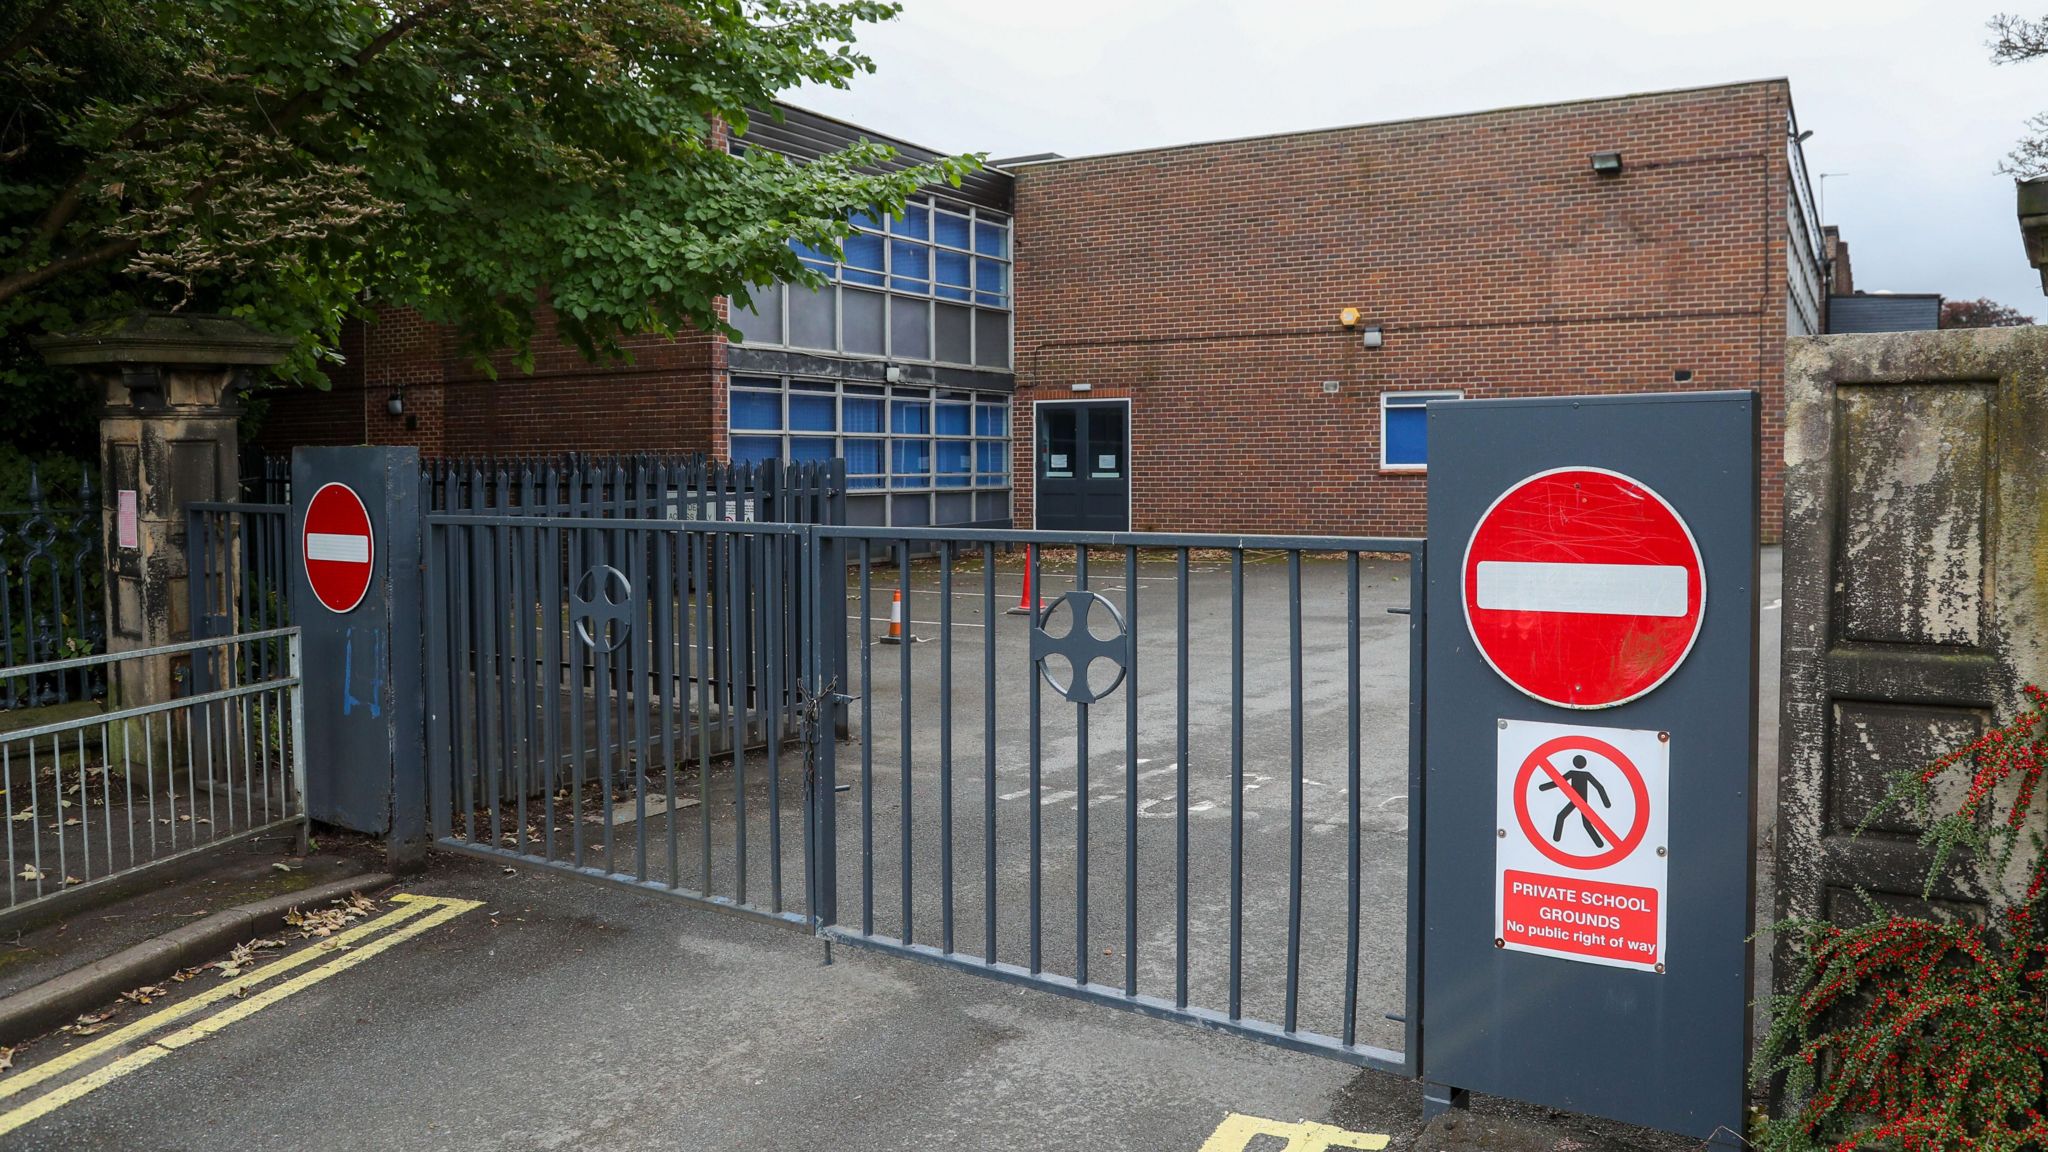 The exterior of St. Leonard's RC School in Durham, which has partially shut due to reinforced autoclaved aerated concrete (Raac) which has been found in buildings across the site.